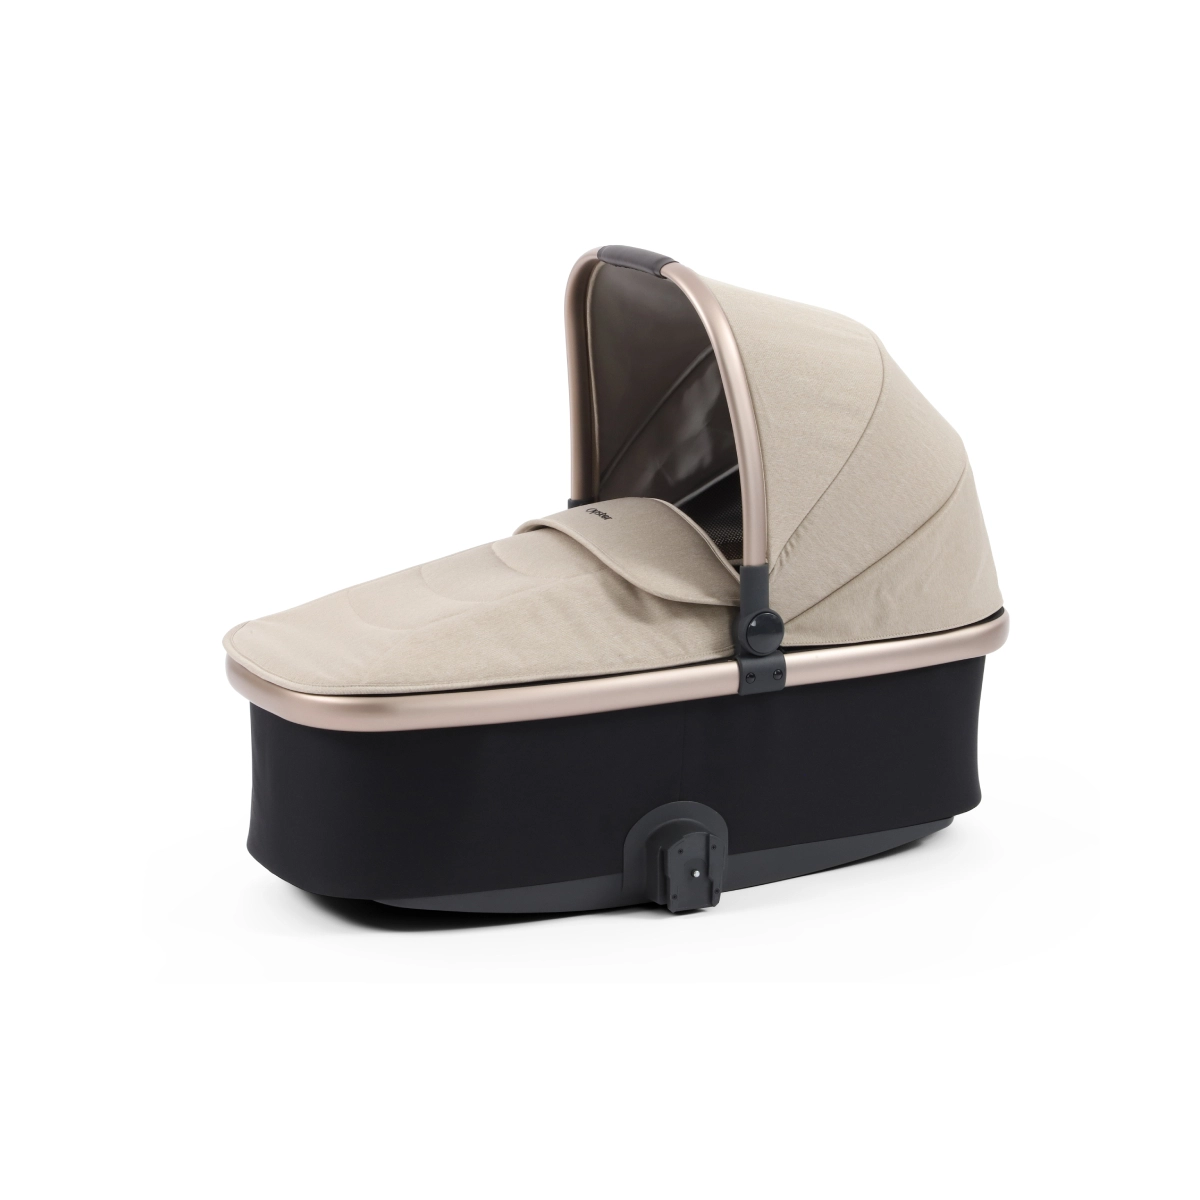 Babystyle Oyster 3 Carrycot